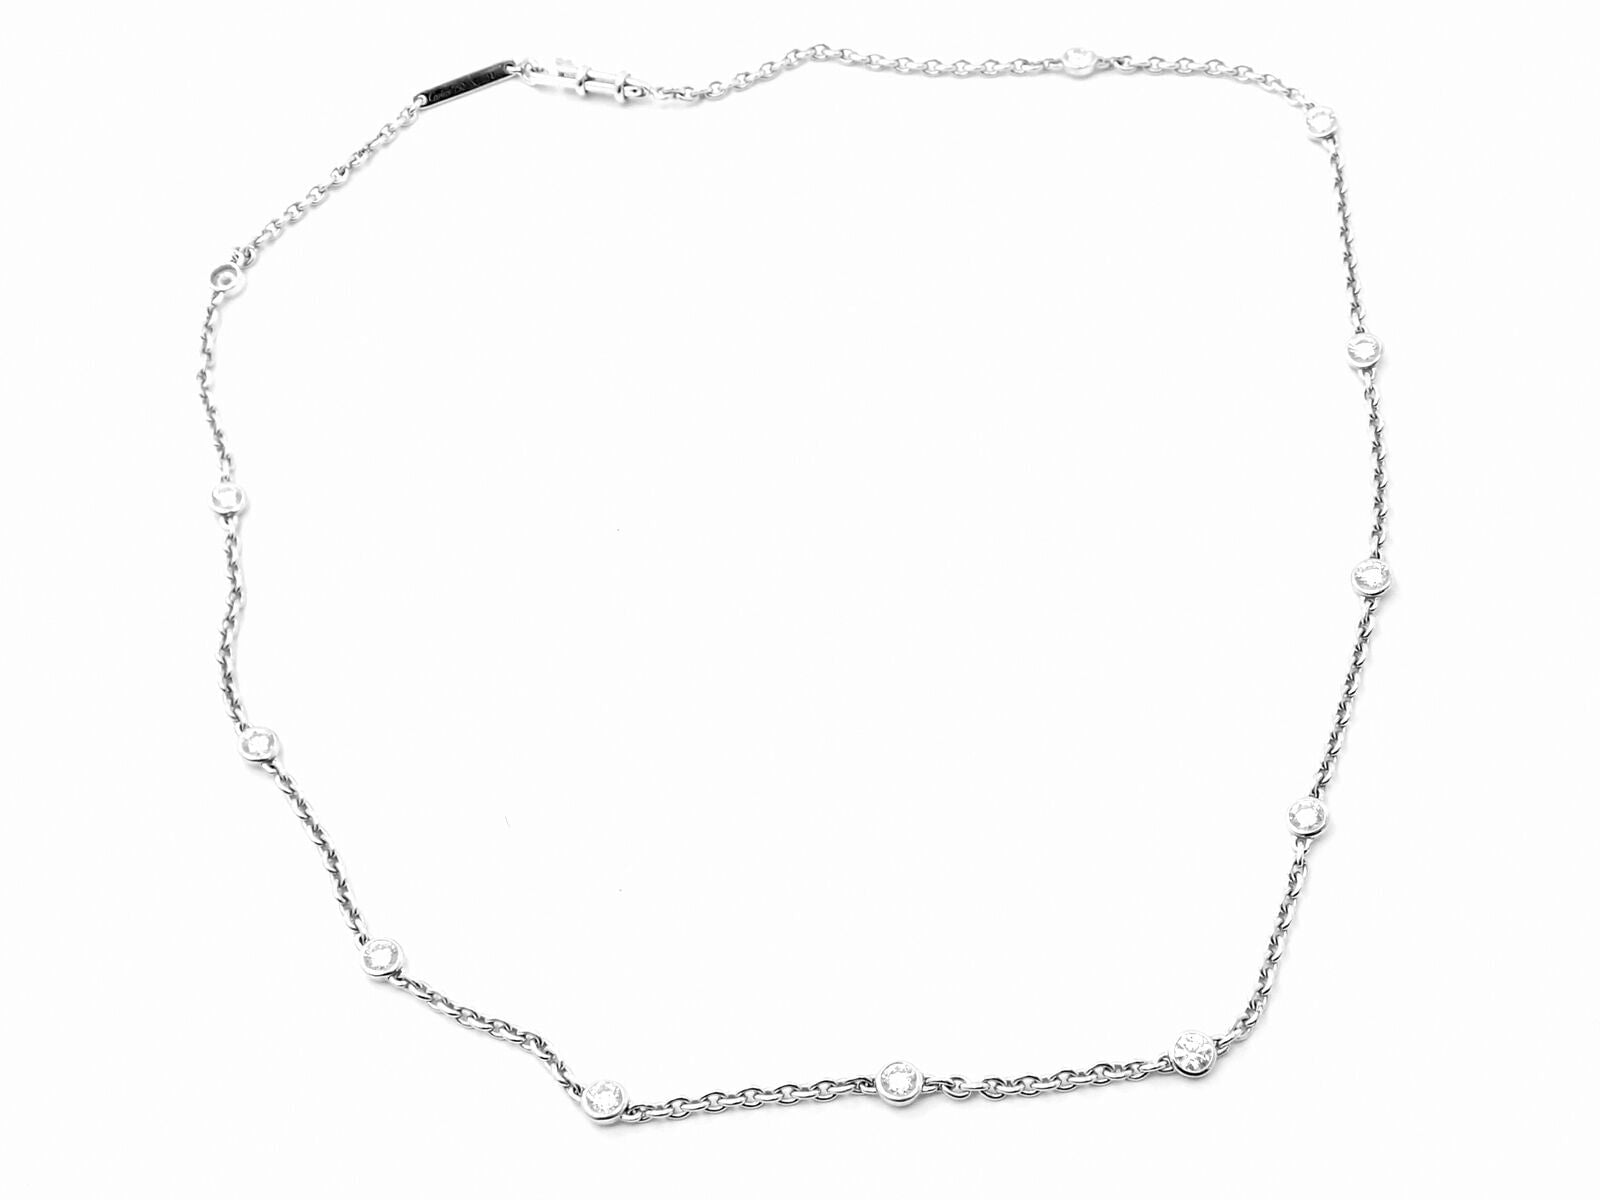 Cartier Jewelry & Watches:Fine Jewelry:Necklaces & Pendants Authentic! Cartier 18k White Gold 1.5ct Diamond By The Yard Chain Necklace